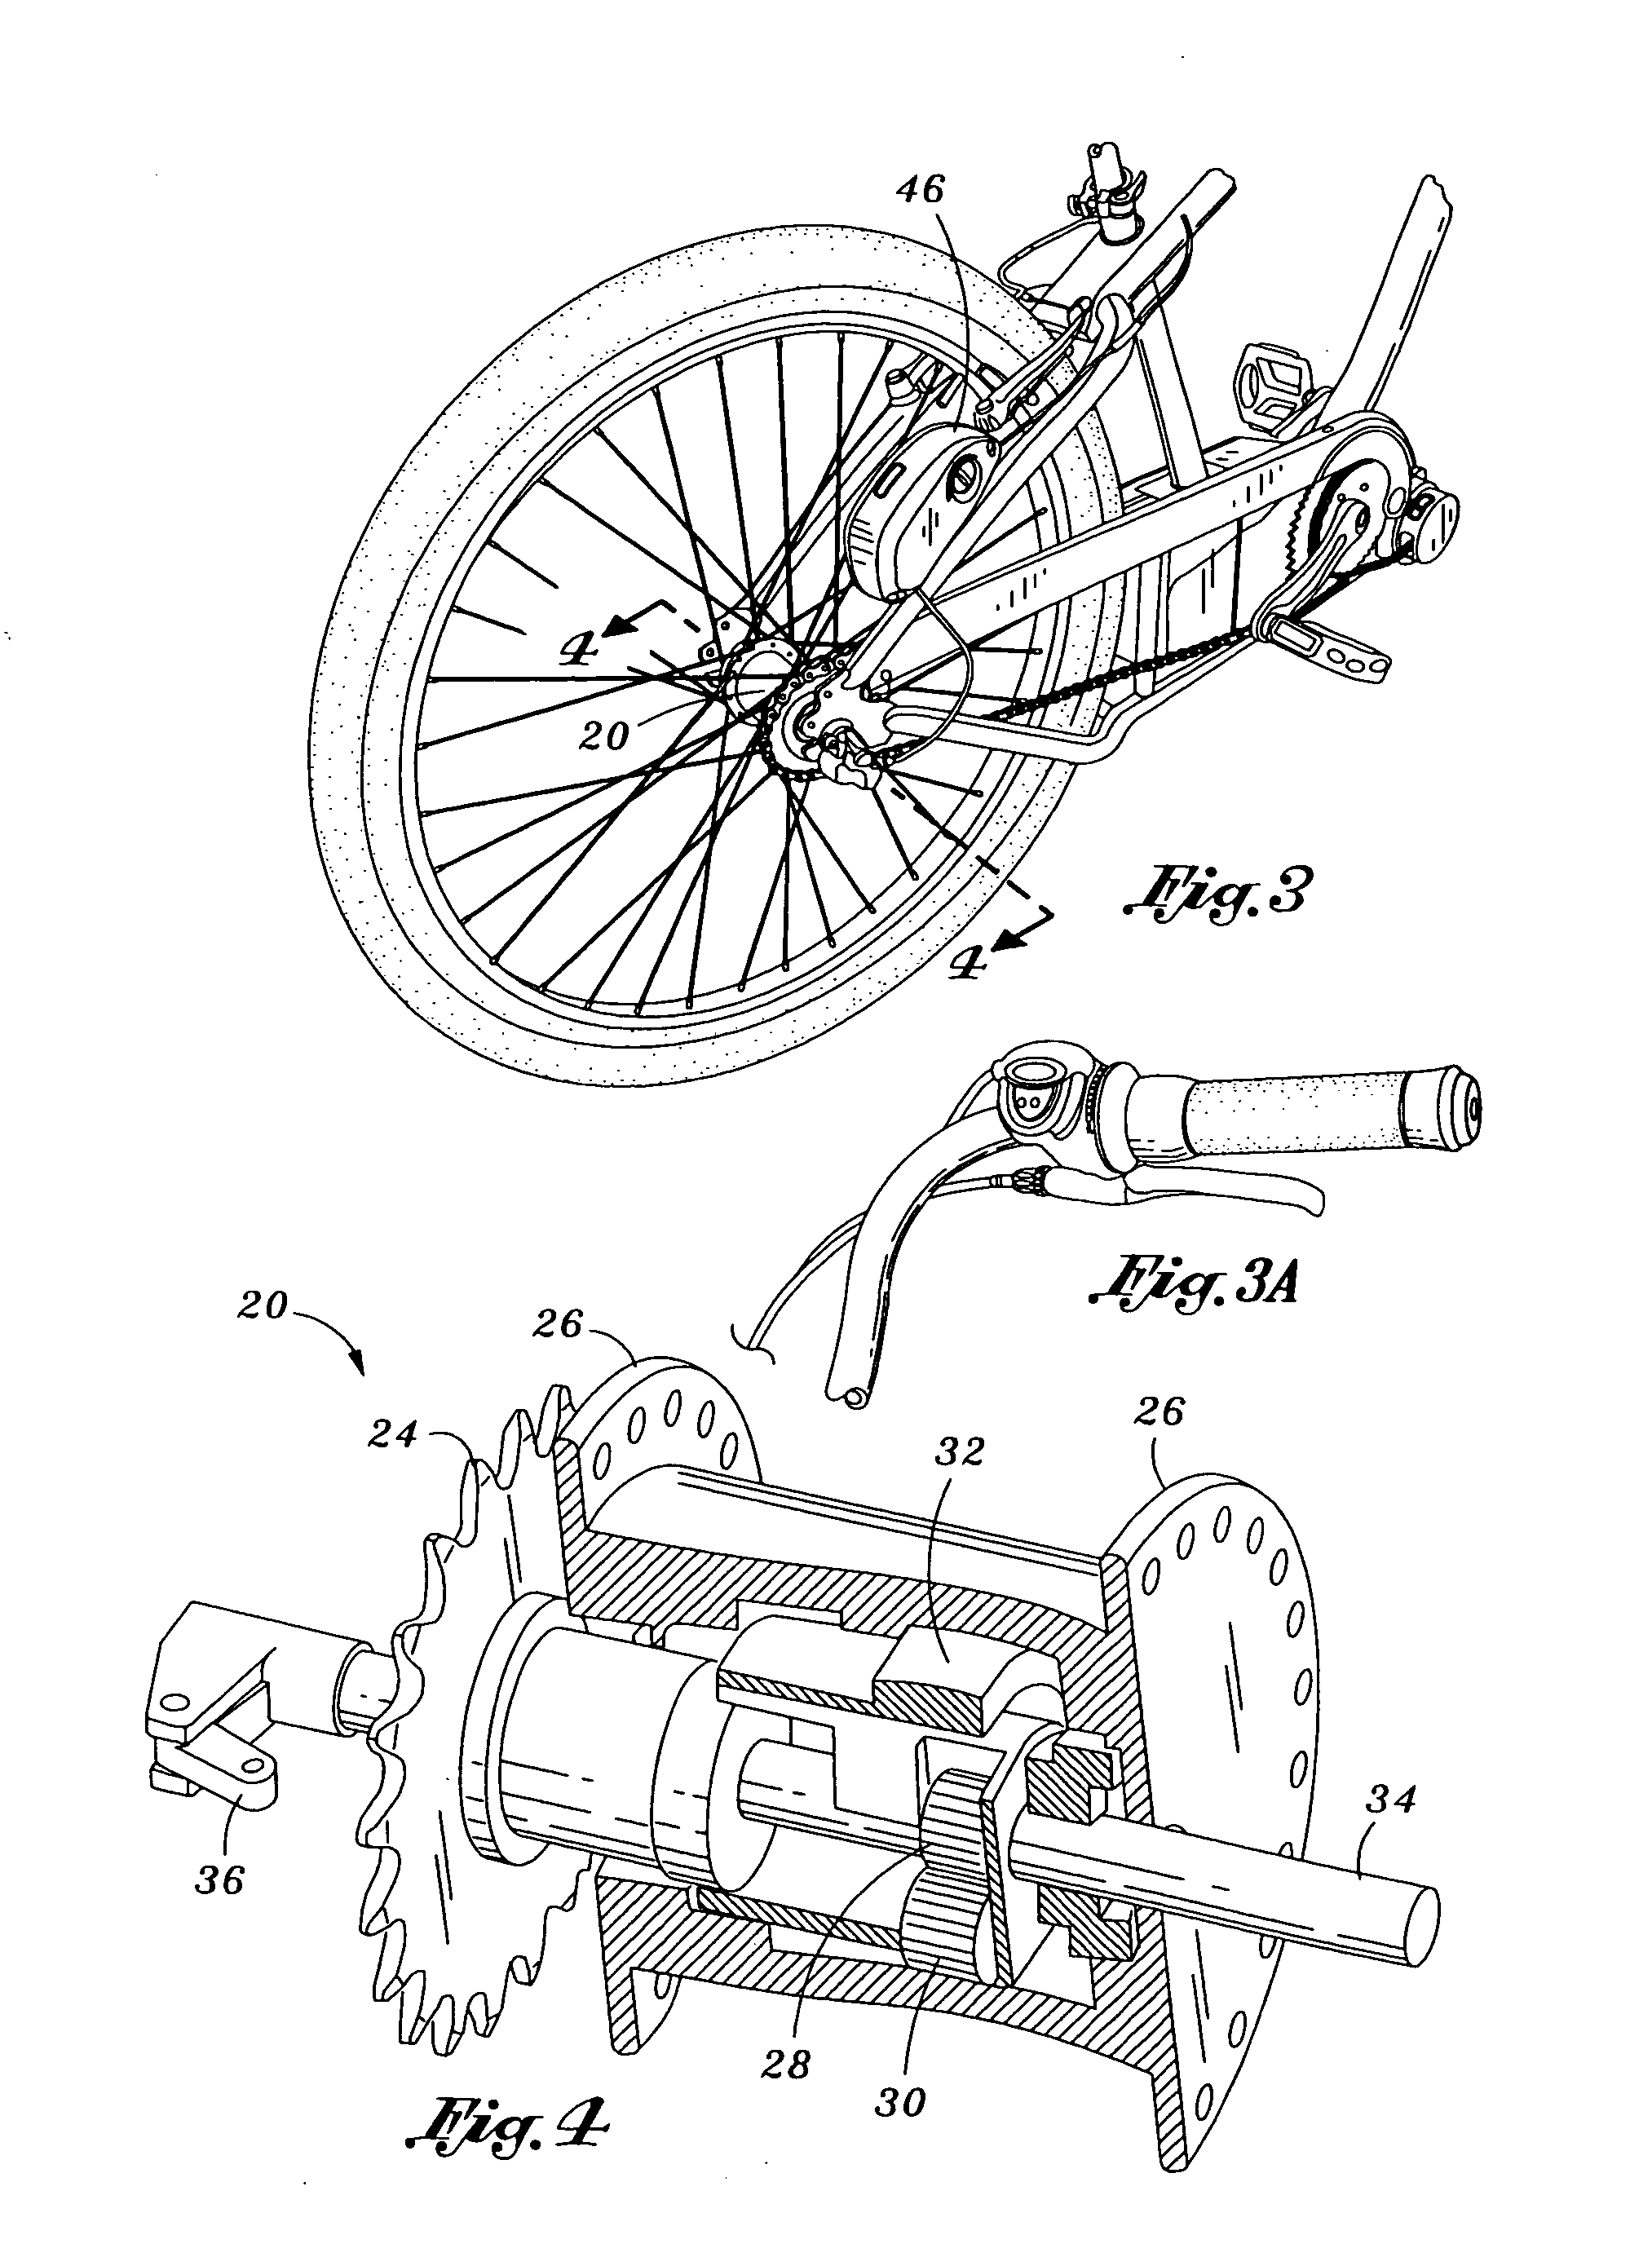 Propelled bicycle with automatic transmission